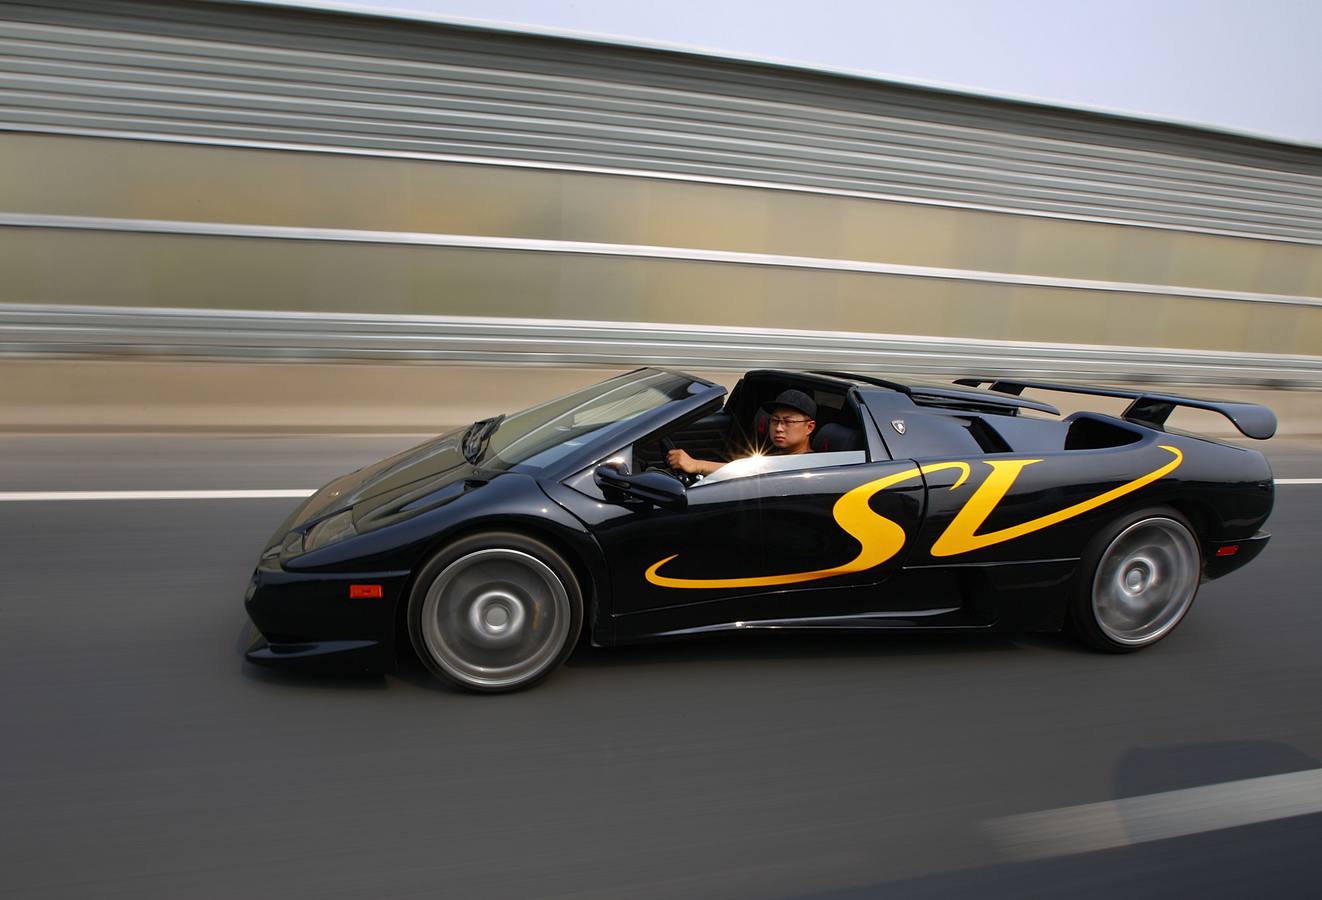 Wang Yu drives a handmade replica of Lamborghini Diablo on a highway during a test drive in Beijing. Chinese race car enthusiasts Wang Yu and his partner Li Lintao spent approximately 812,000 dollars on parts and workers, taking them six years to assemble the car using knowledge they gained from studying engineering for nearly a decade abroad. They sold their second Lamborghini replica to Alibaba as a collection.